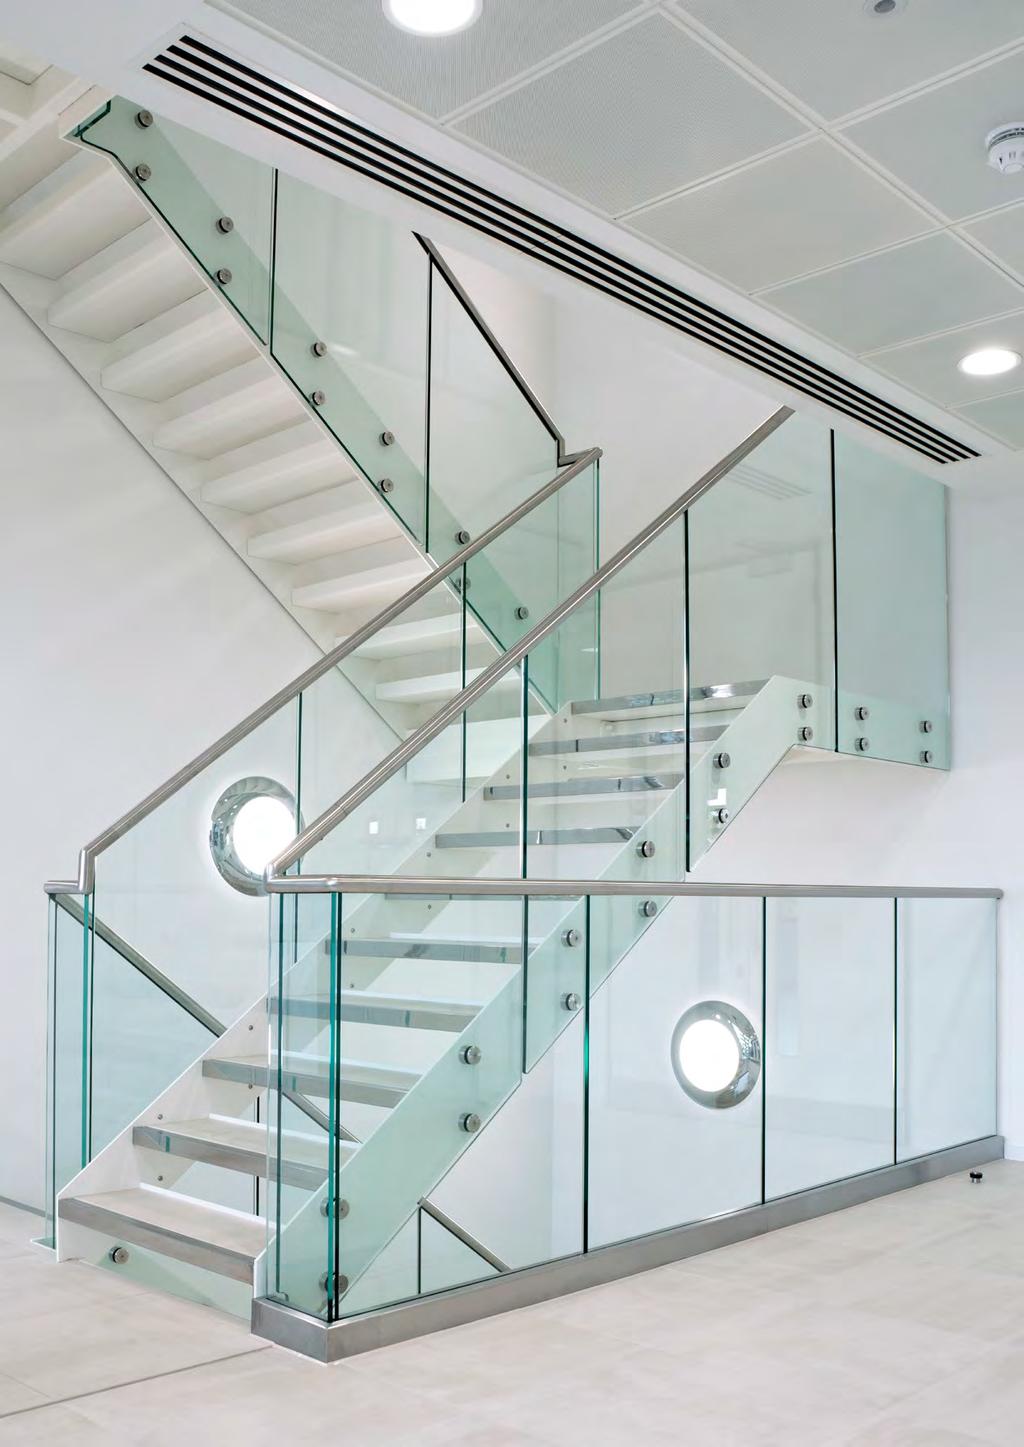 uk > 15mm clear toughened structural glass with a combination of base fixing